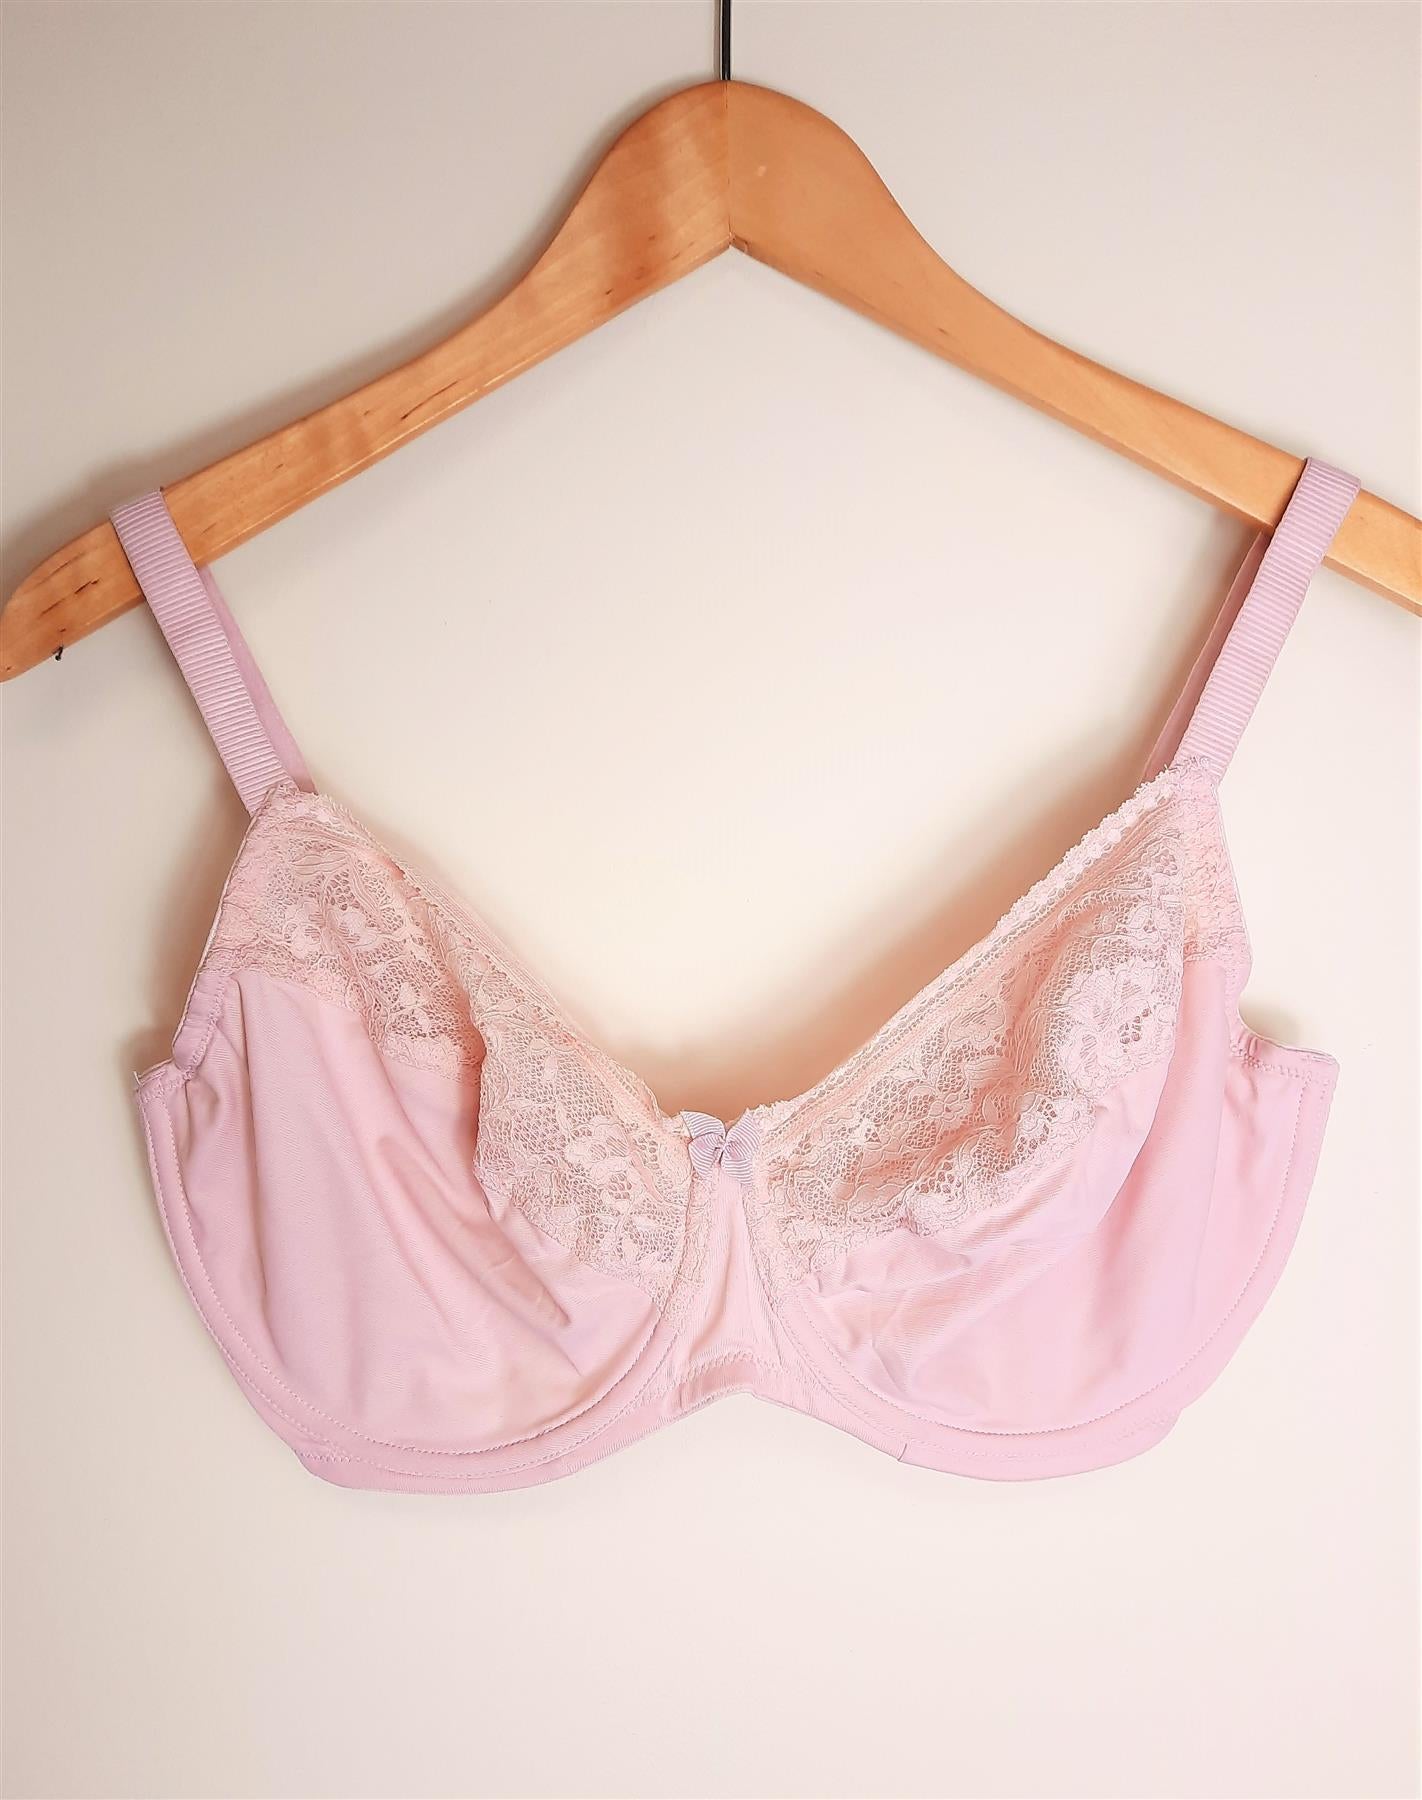 Full Cup Minimising Bra Underwired Non-Padded Lace Trim Brand New Shop Soiled